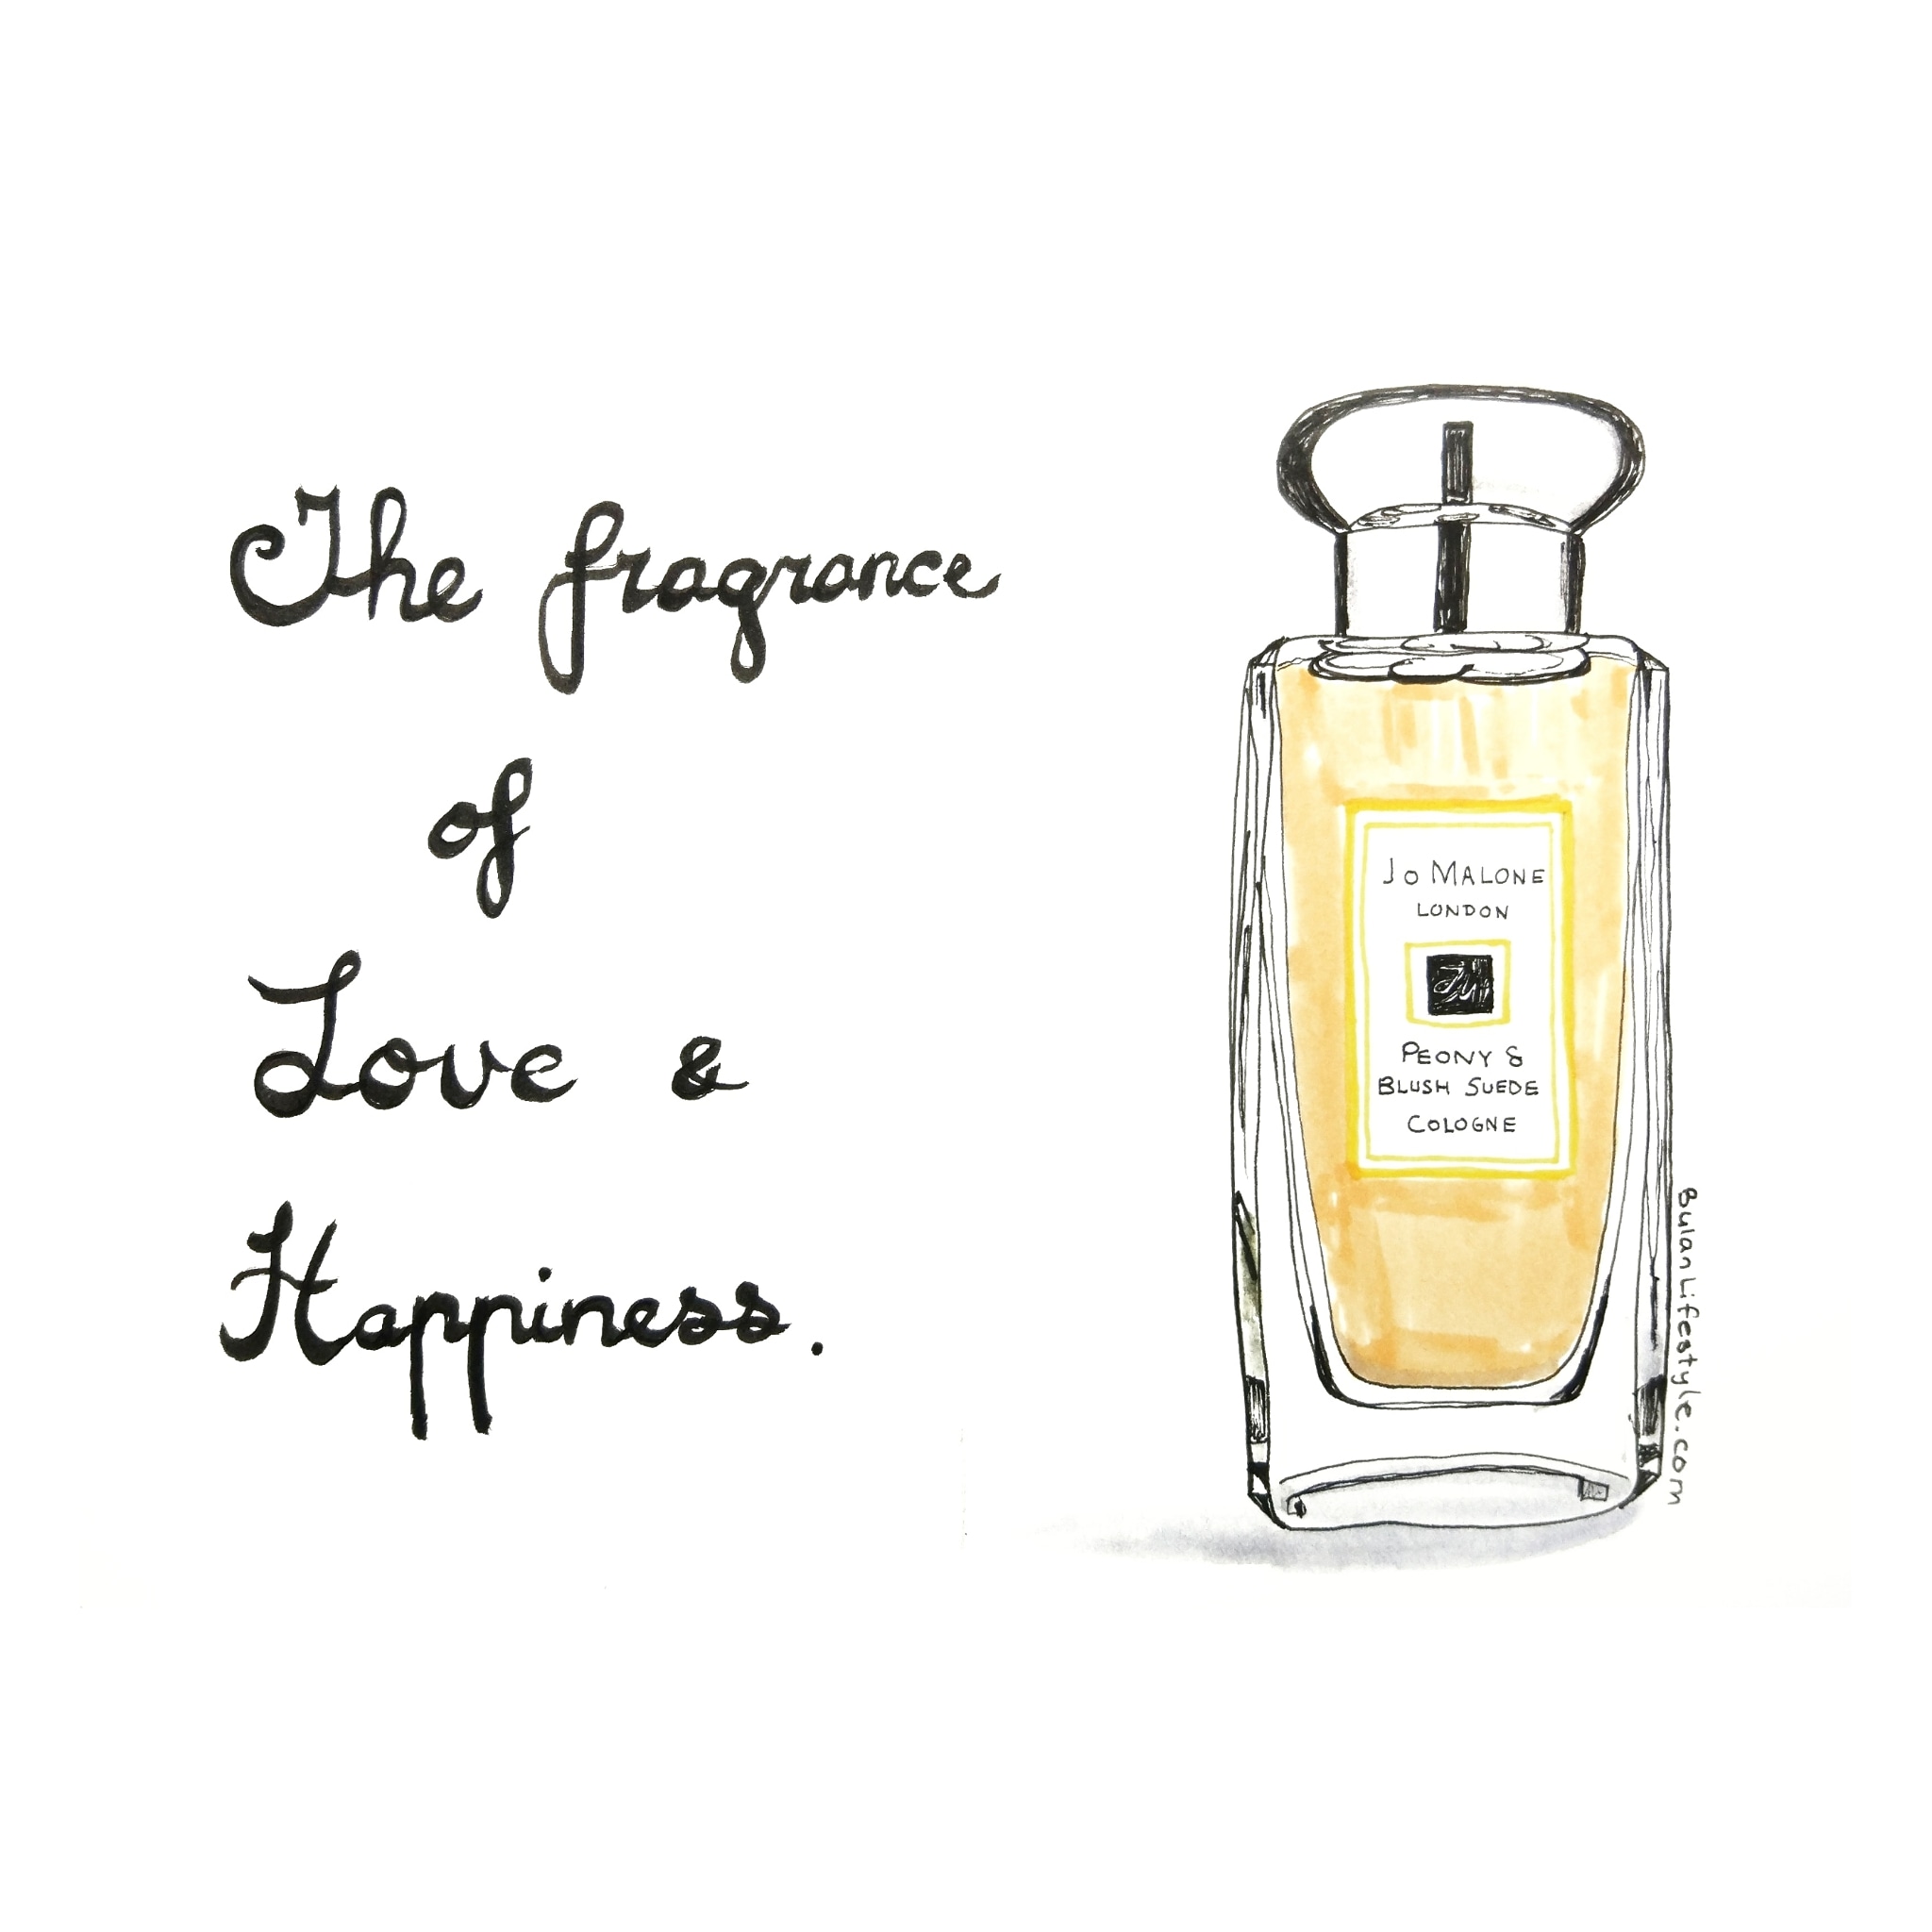 The fragrance of love and happiness